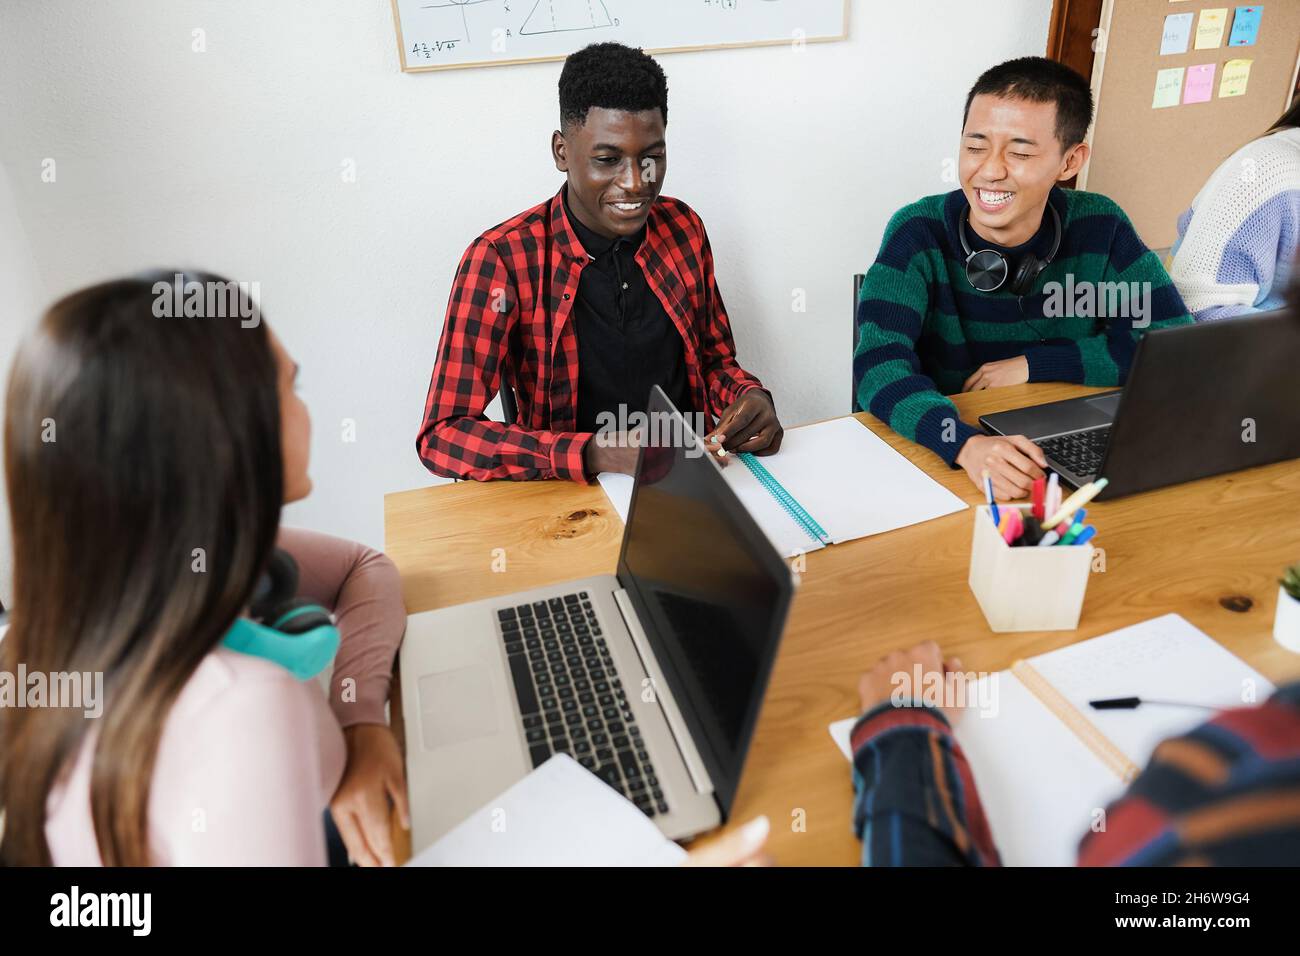 Multiracial students using laptop computers while studying together at school - Focus on african man face Stock Photo